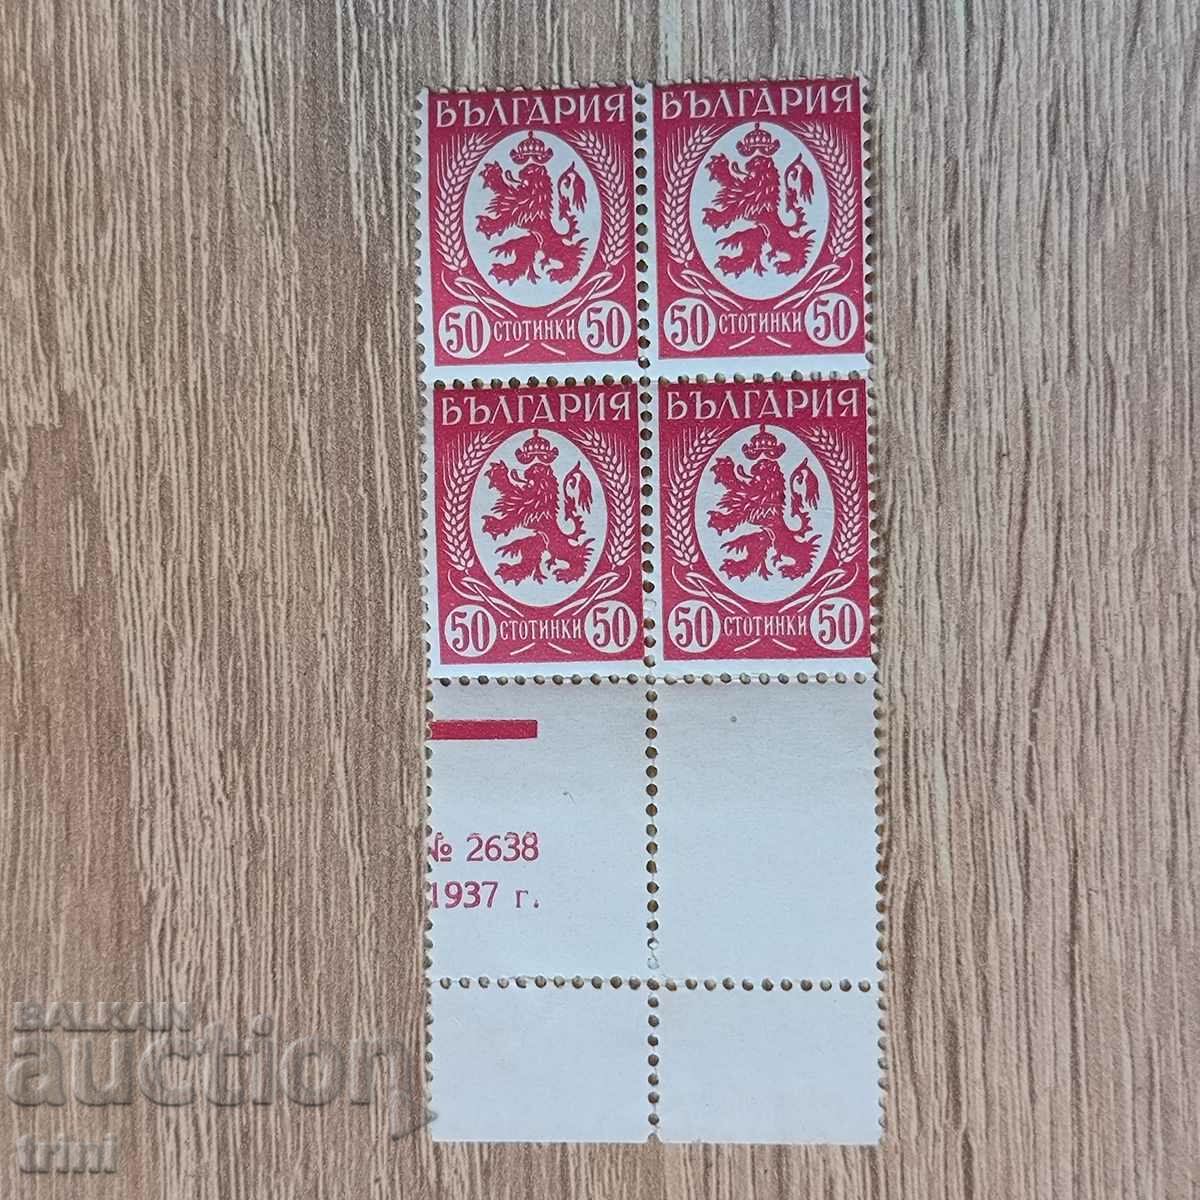 Bulgaria 1936 50 cents square red variant